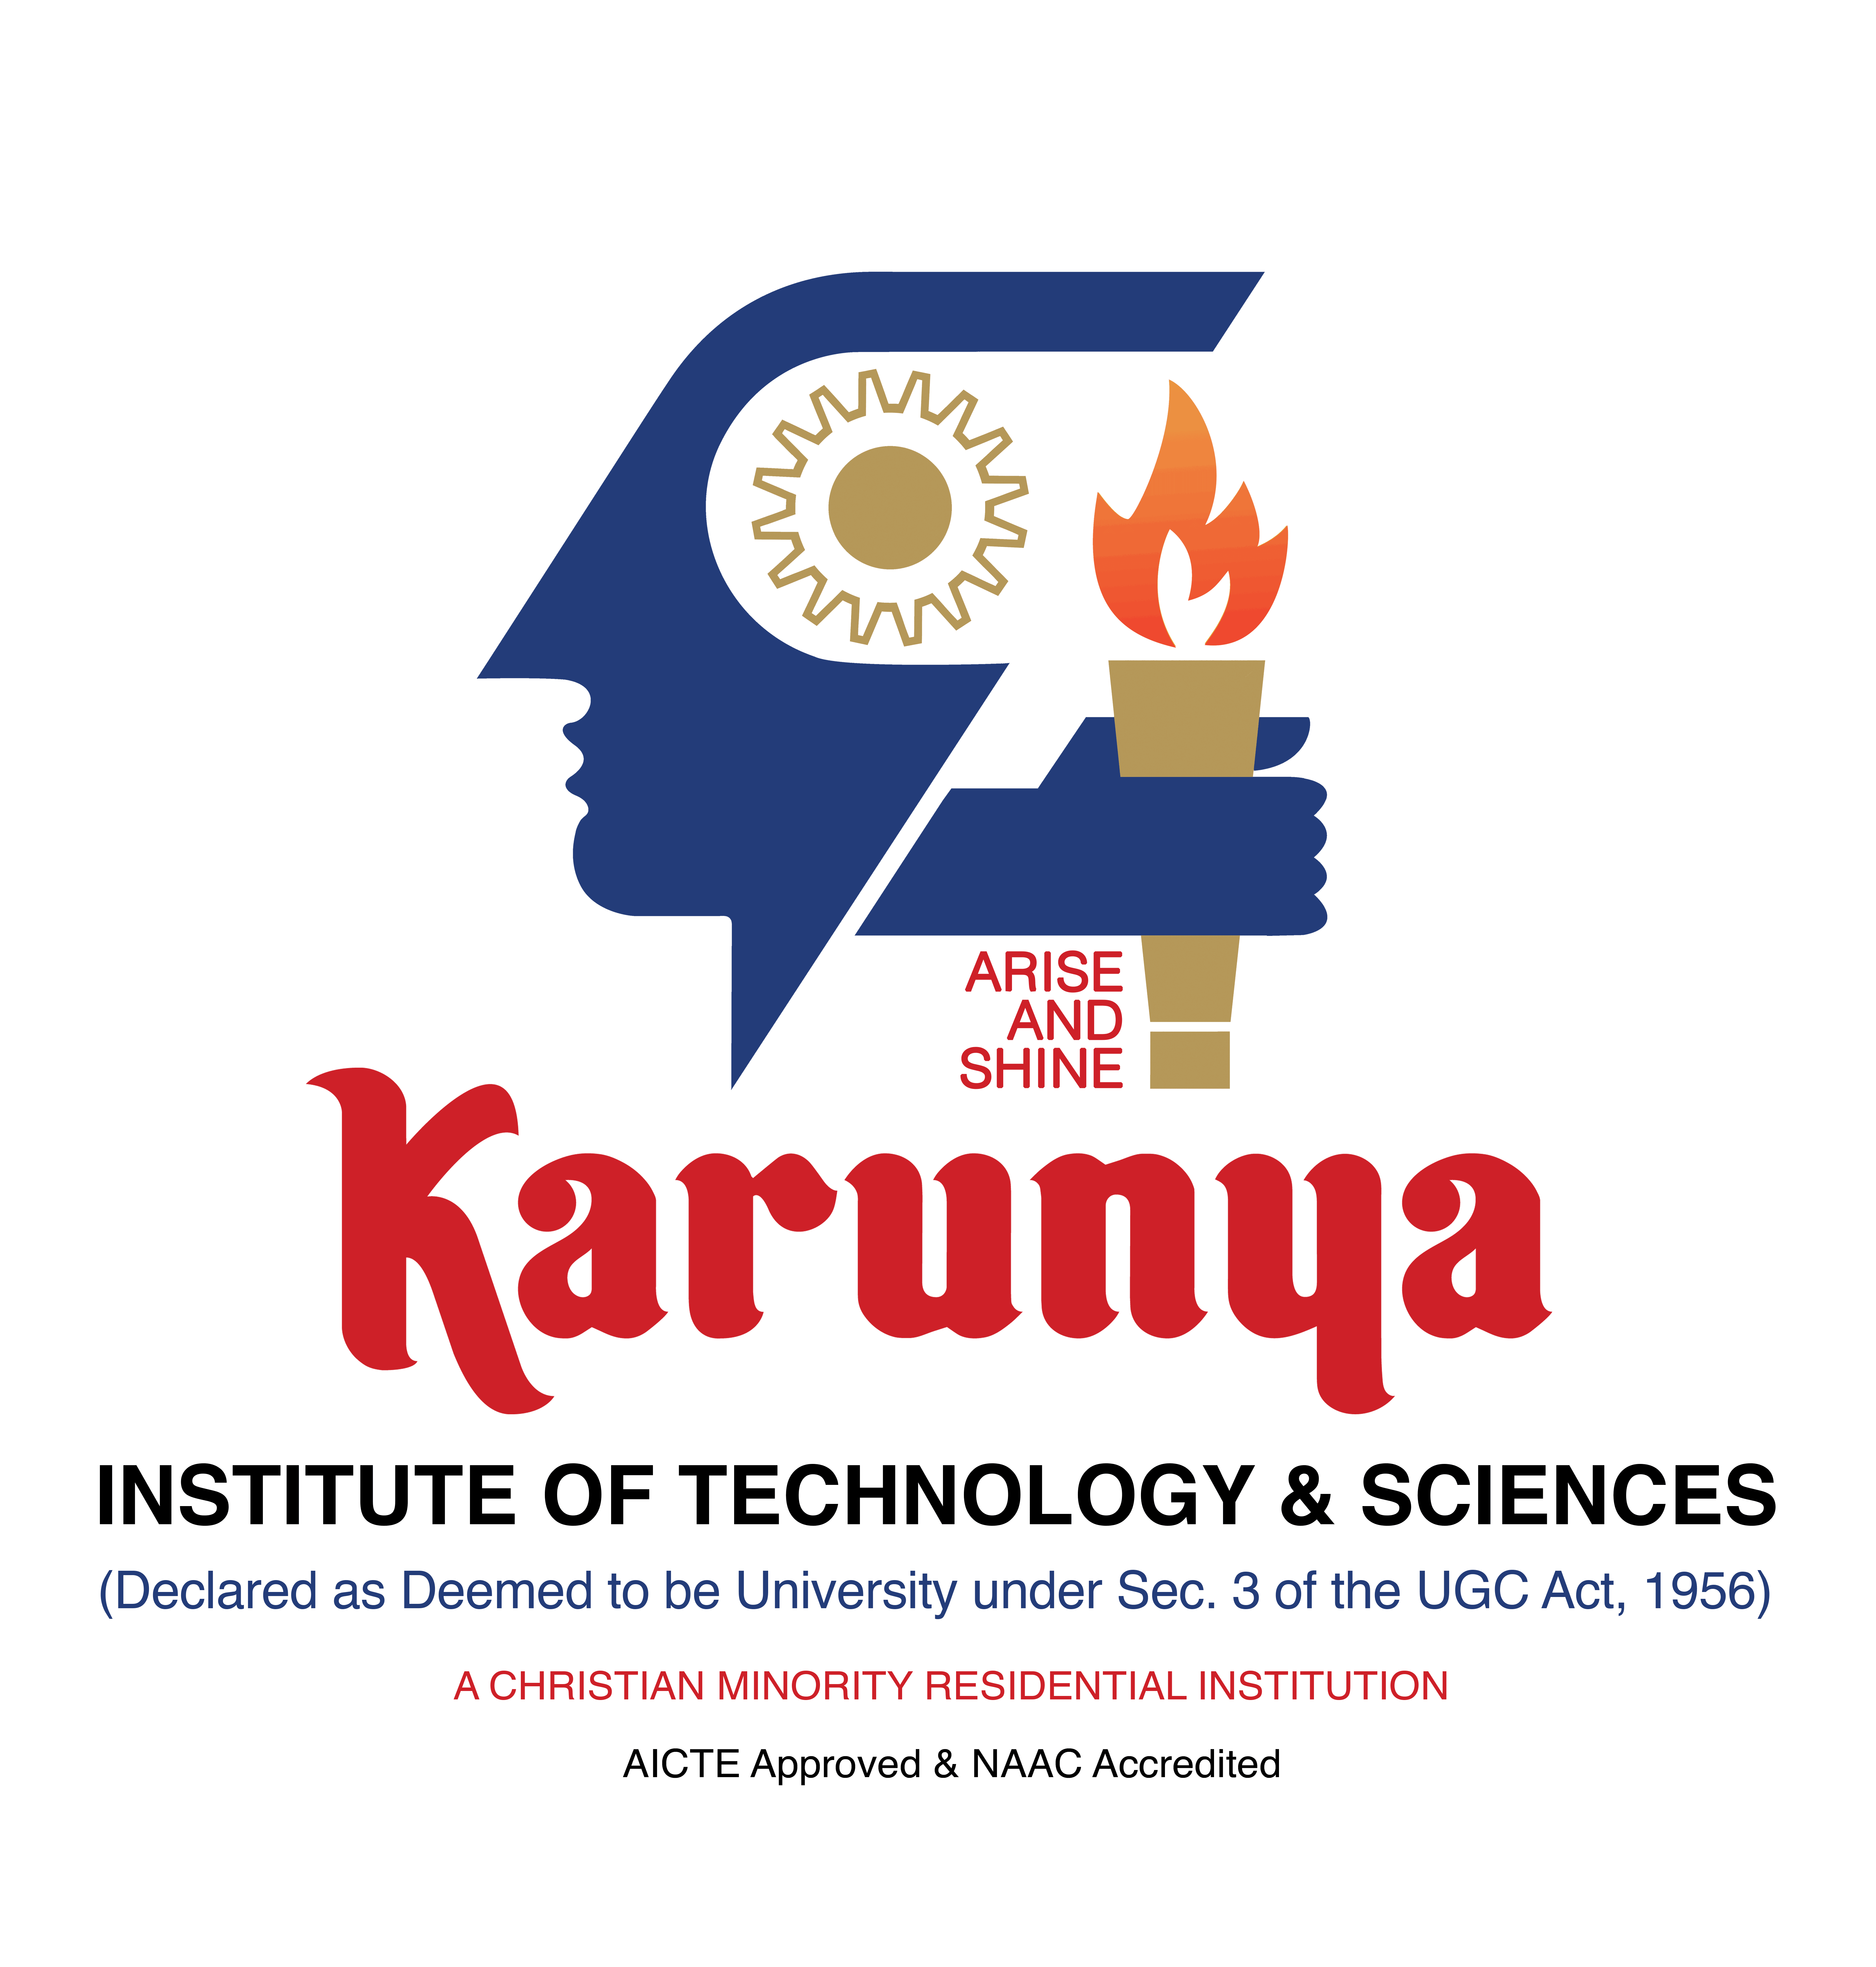 KARUNYA INSTITUTE OF TECHNOLOGY AND SCIENCES